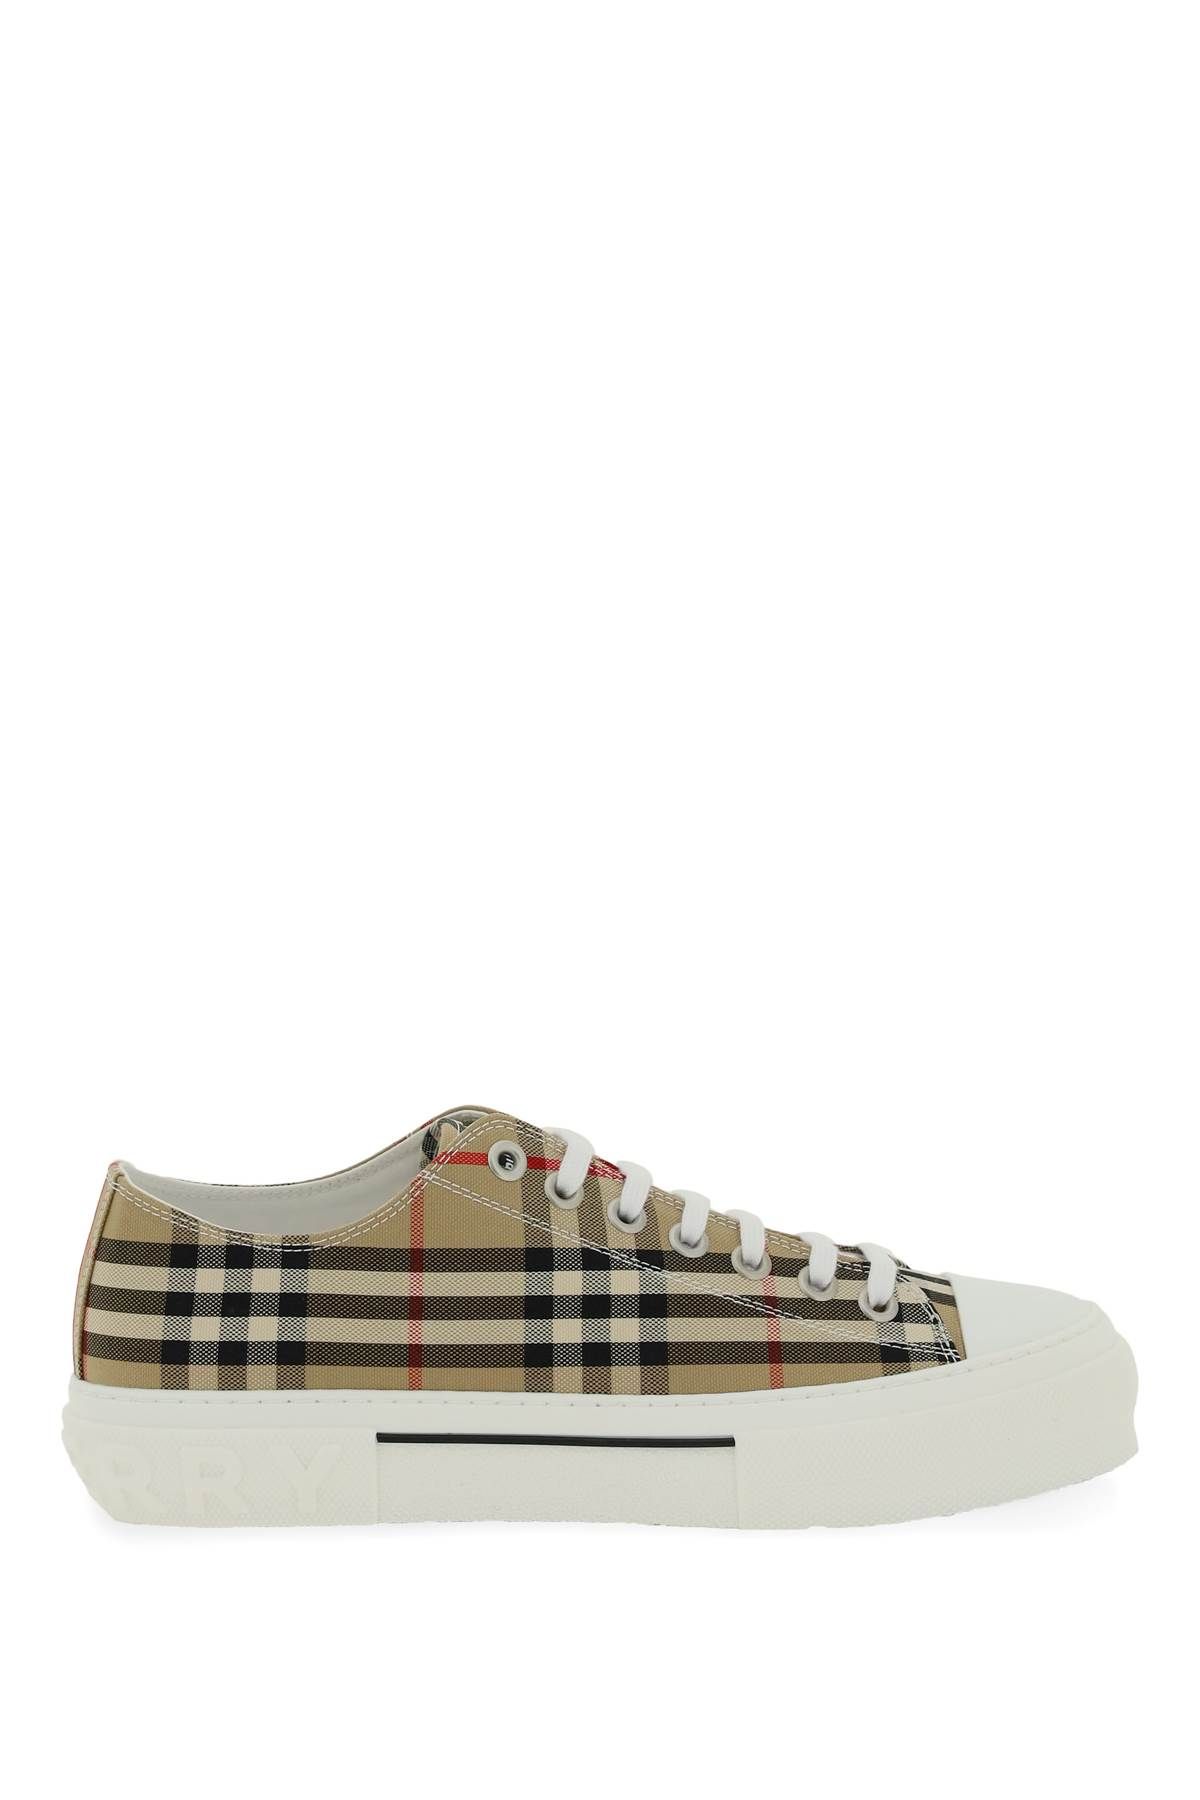 Shop Burberry Vintage Check Canvas Sneakers In Beige,white,black